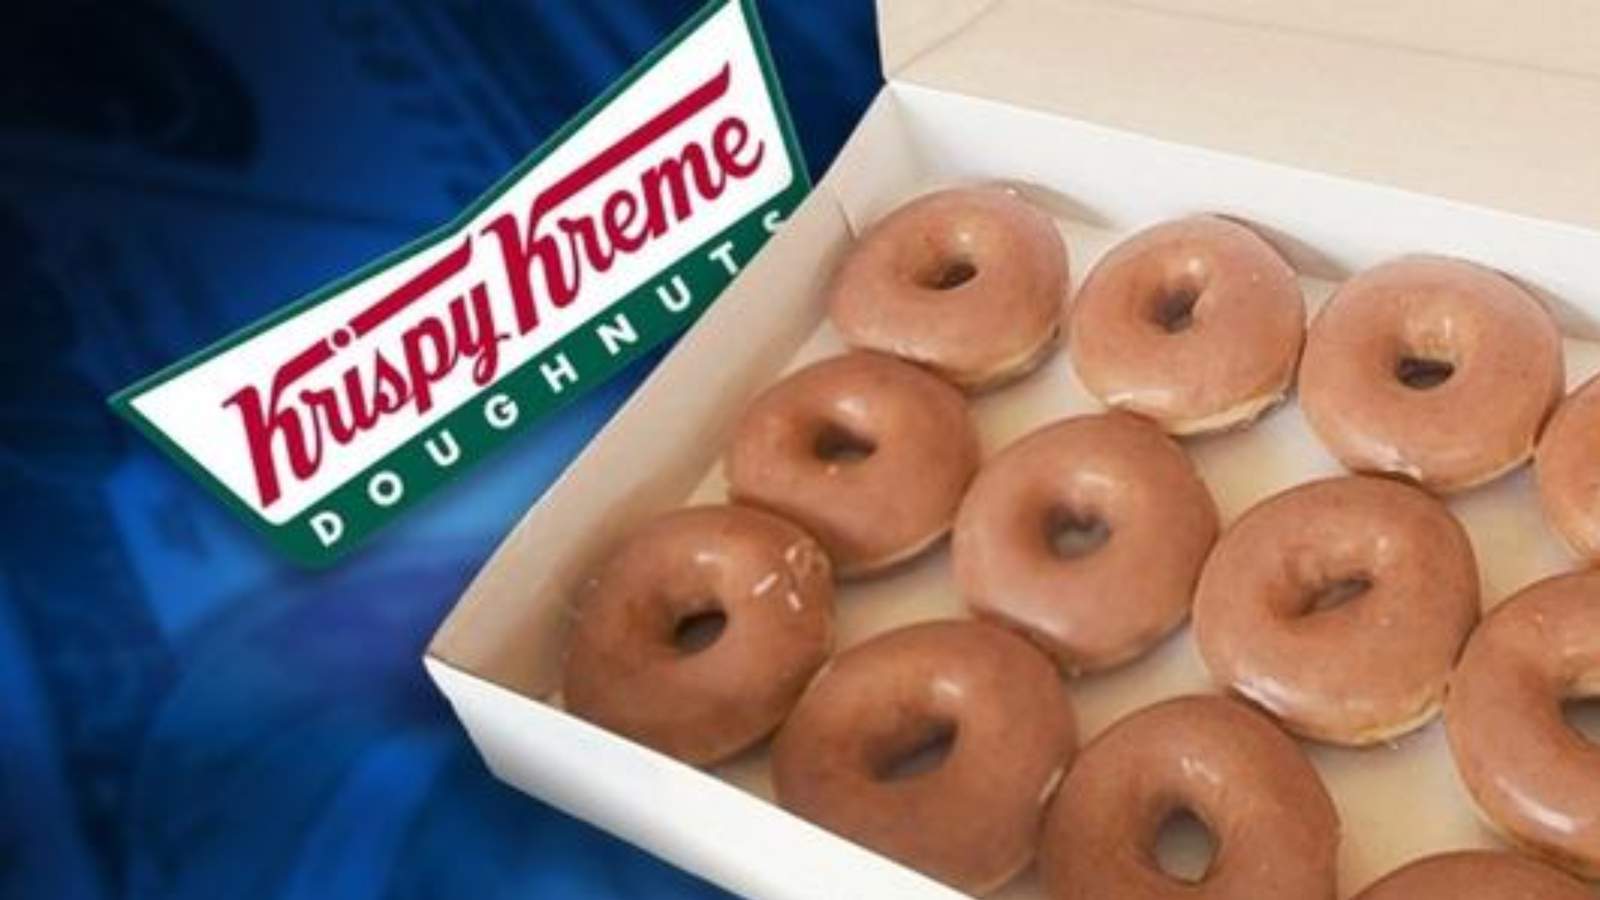 You can score a dozen glazed doughnuts from Krispy Kreme for just $1 on Saturday